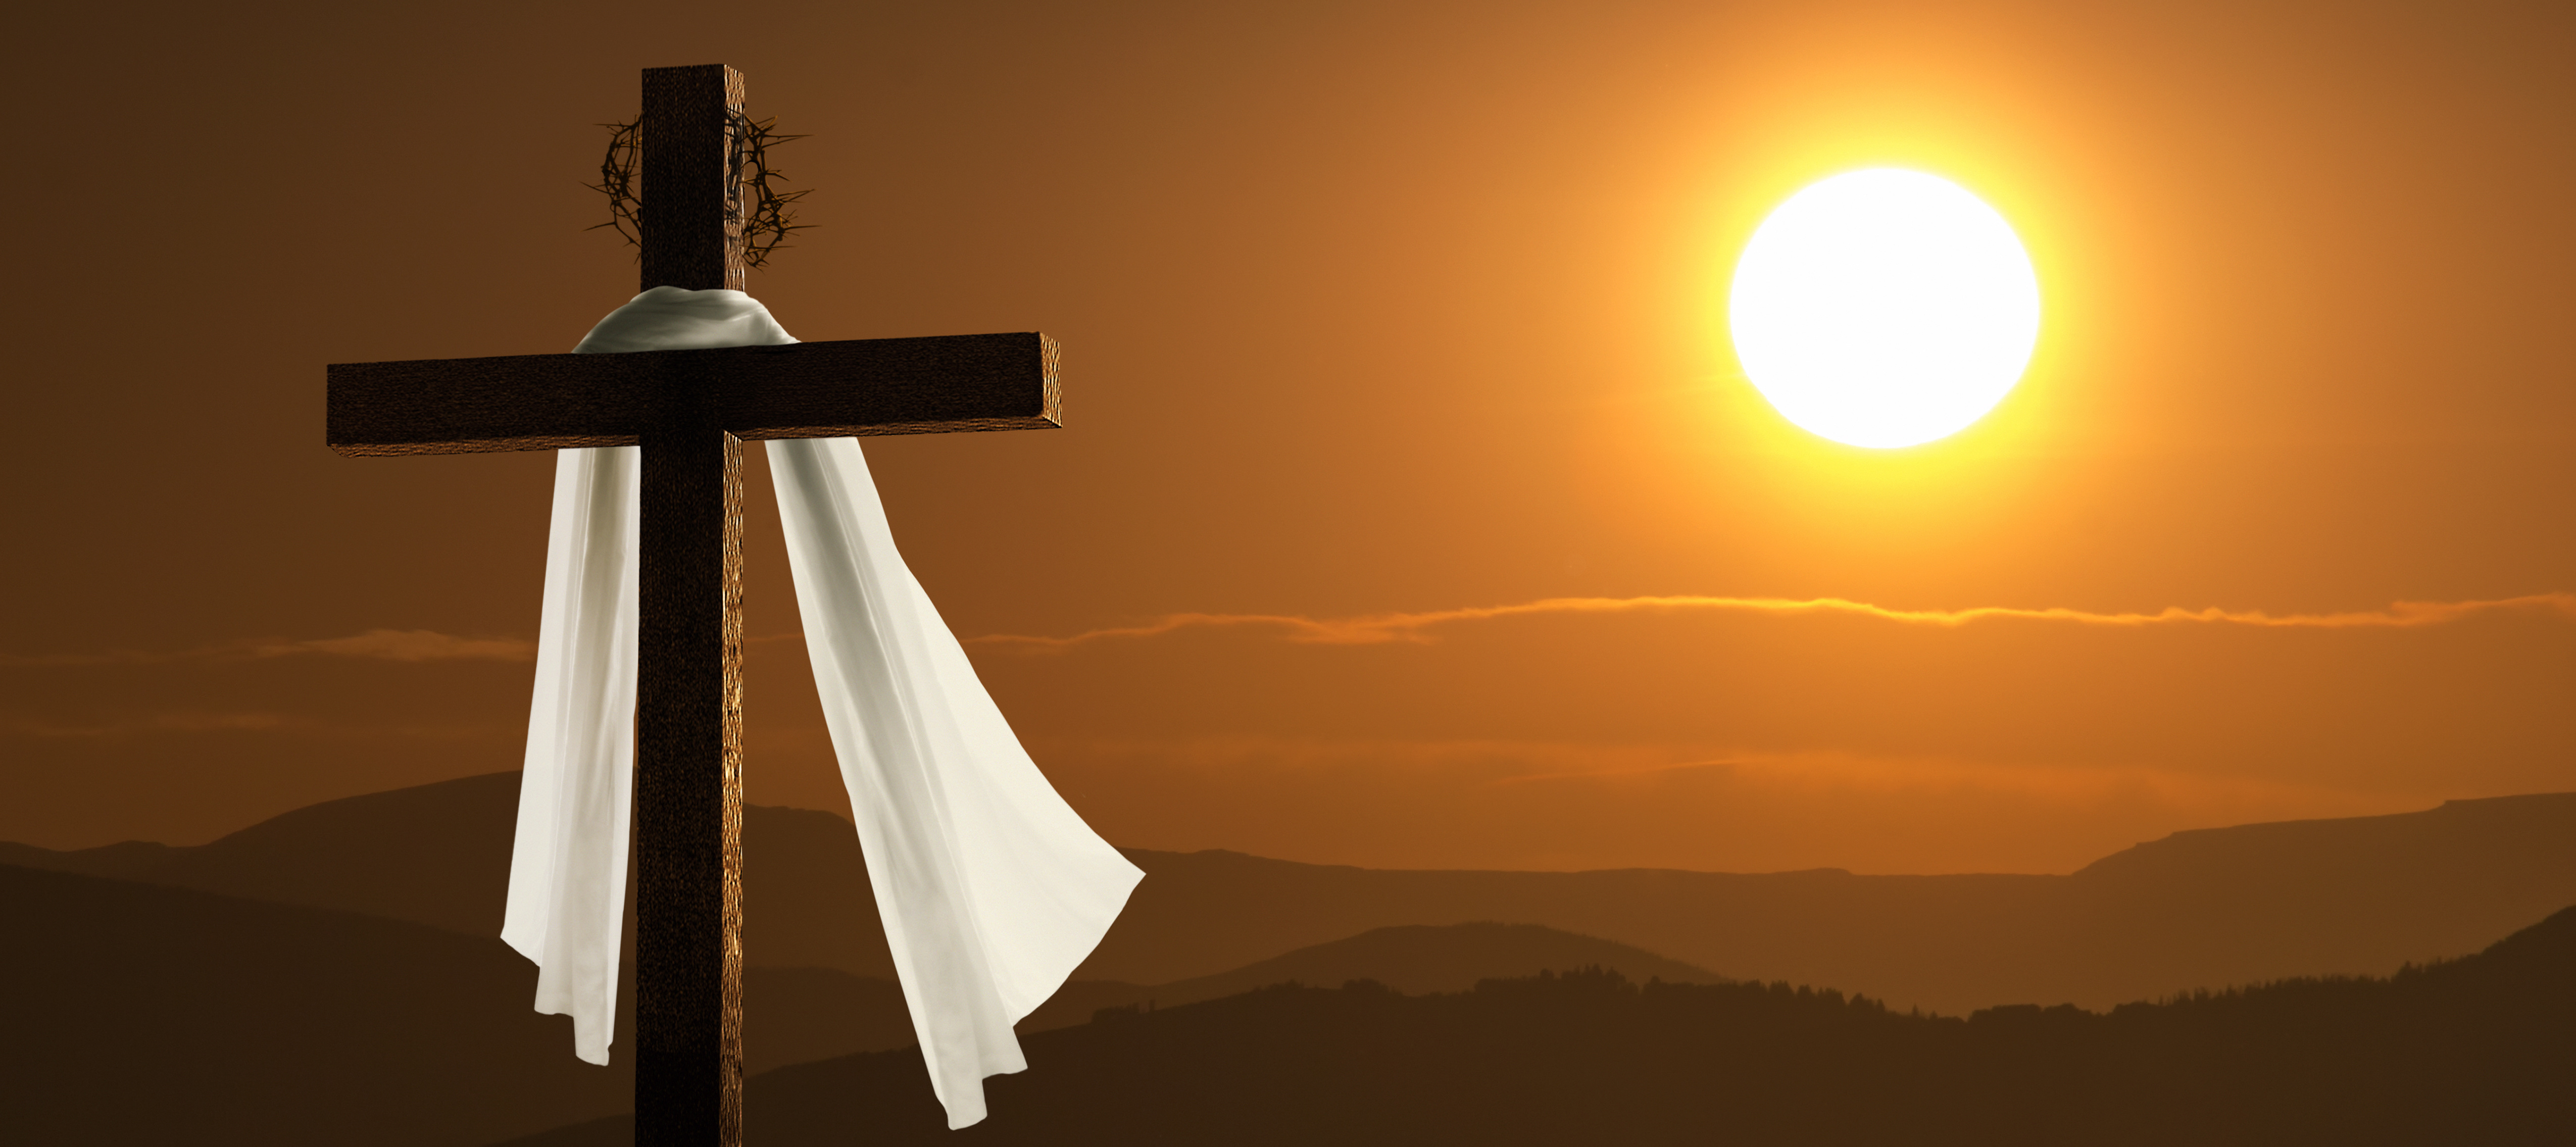 Dramatic Lighting Of Mountain Sunrise With Easter Cross